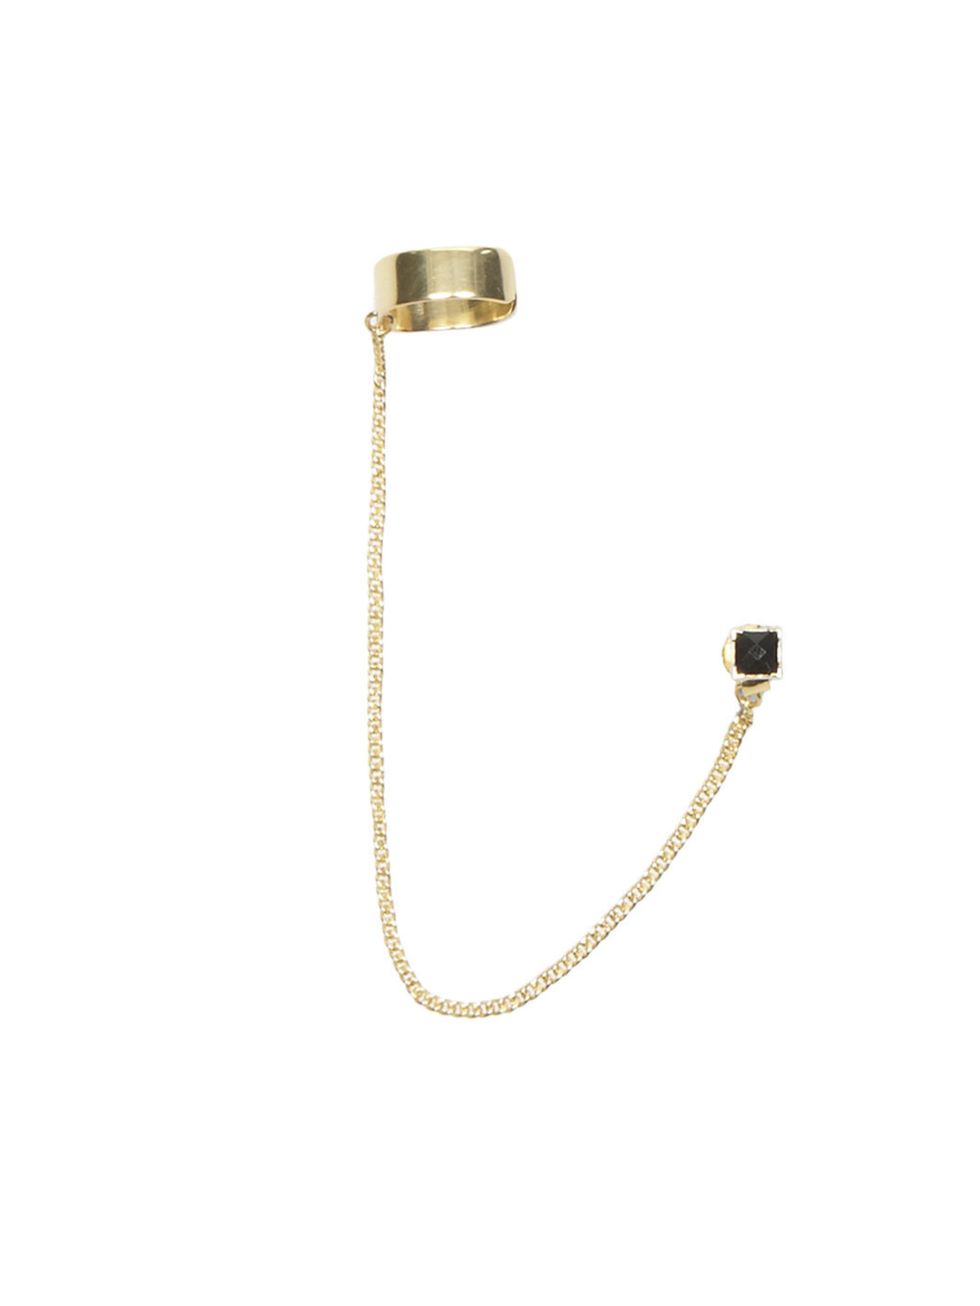 <p>Slick, tough-look gold jewellery is the jewellery trend of the season with ear cuffs having a major moment on (and now off) the catwalk <a href="http://www.allsaints.com/women/new/">AllSaints</a> gold ear cuff, £15</p>